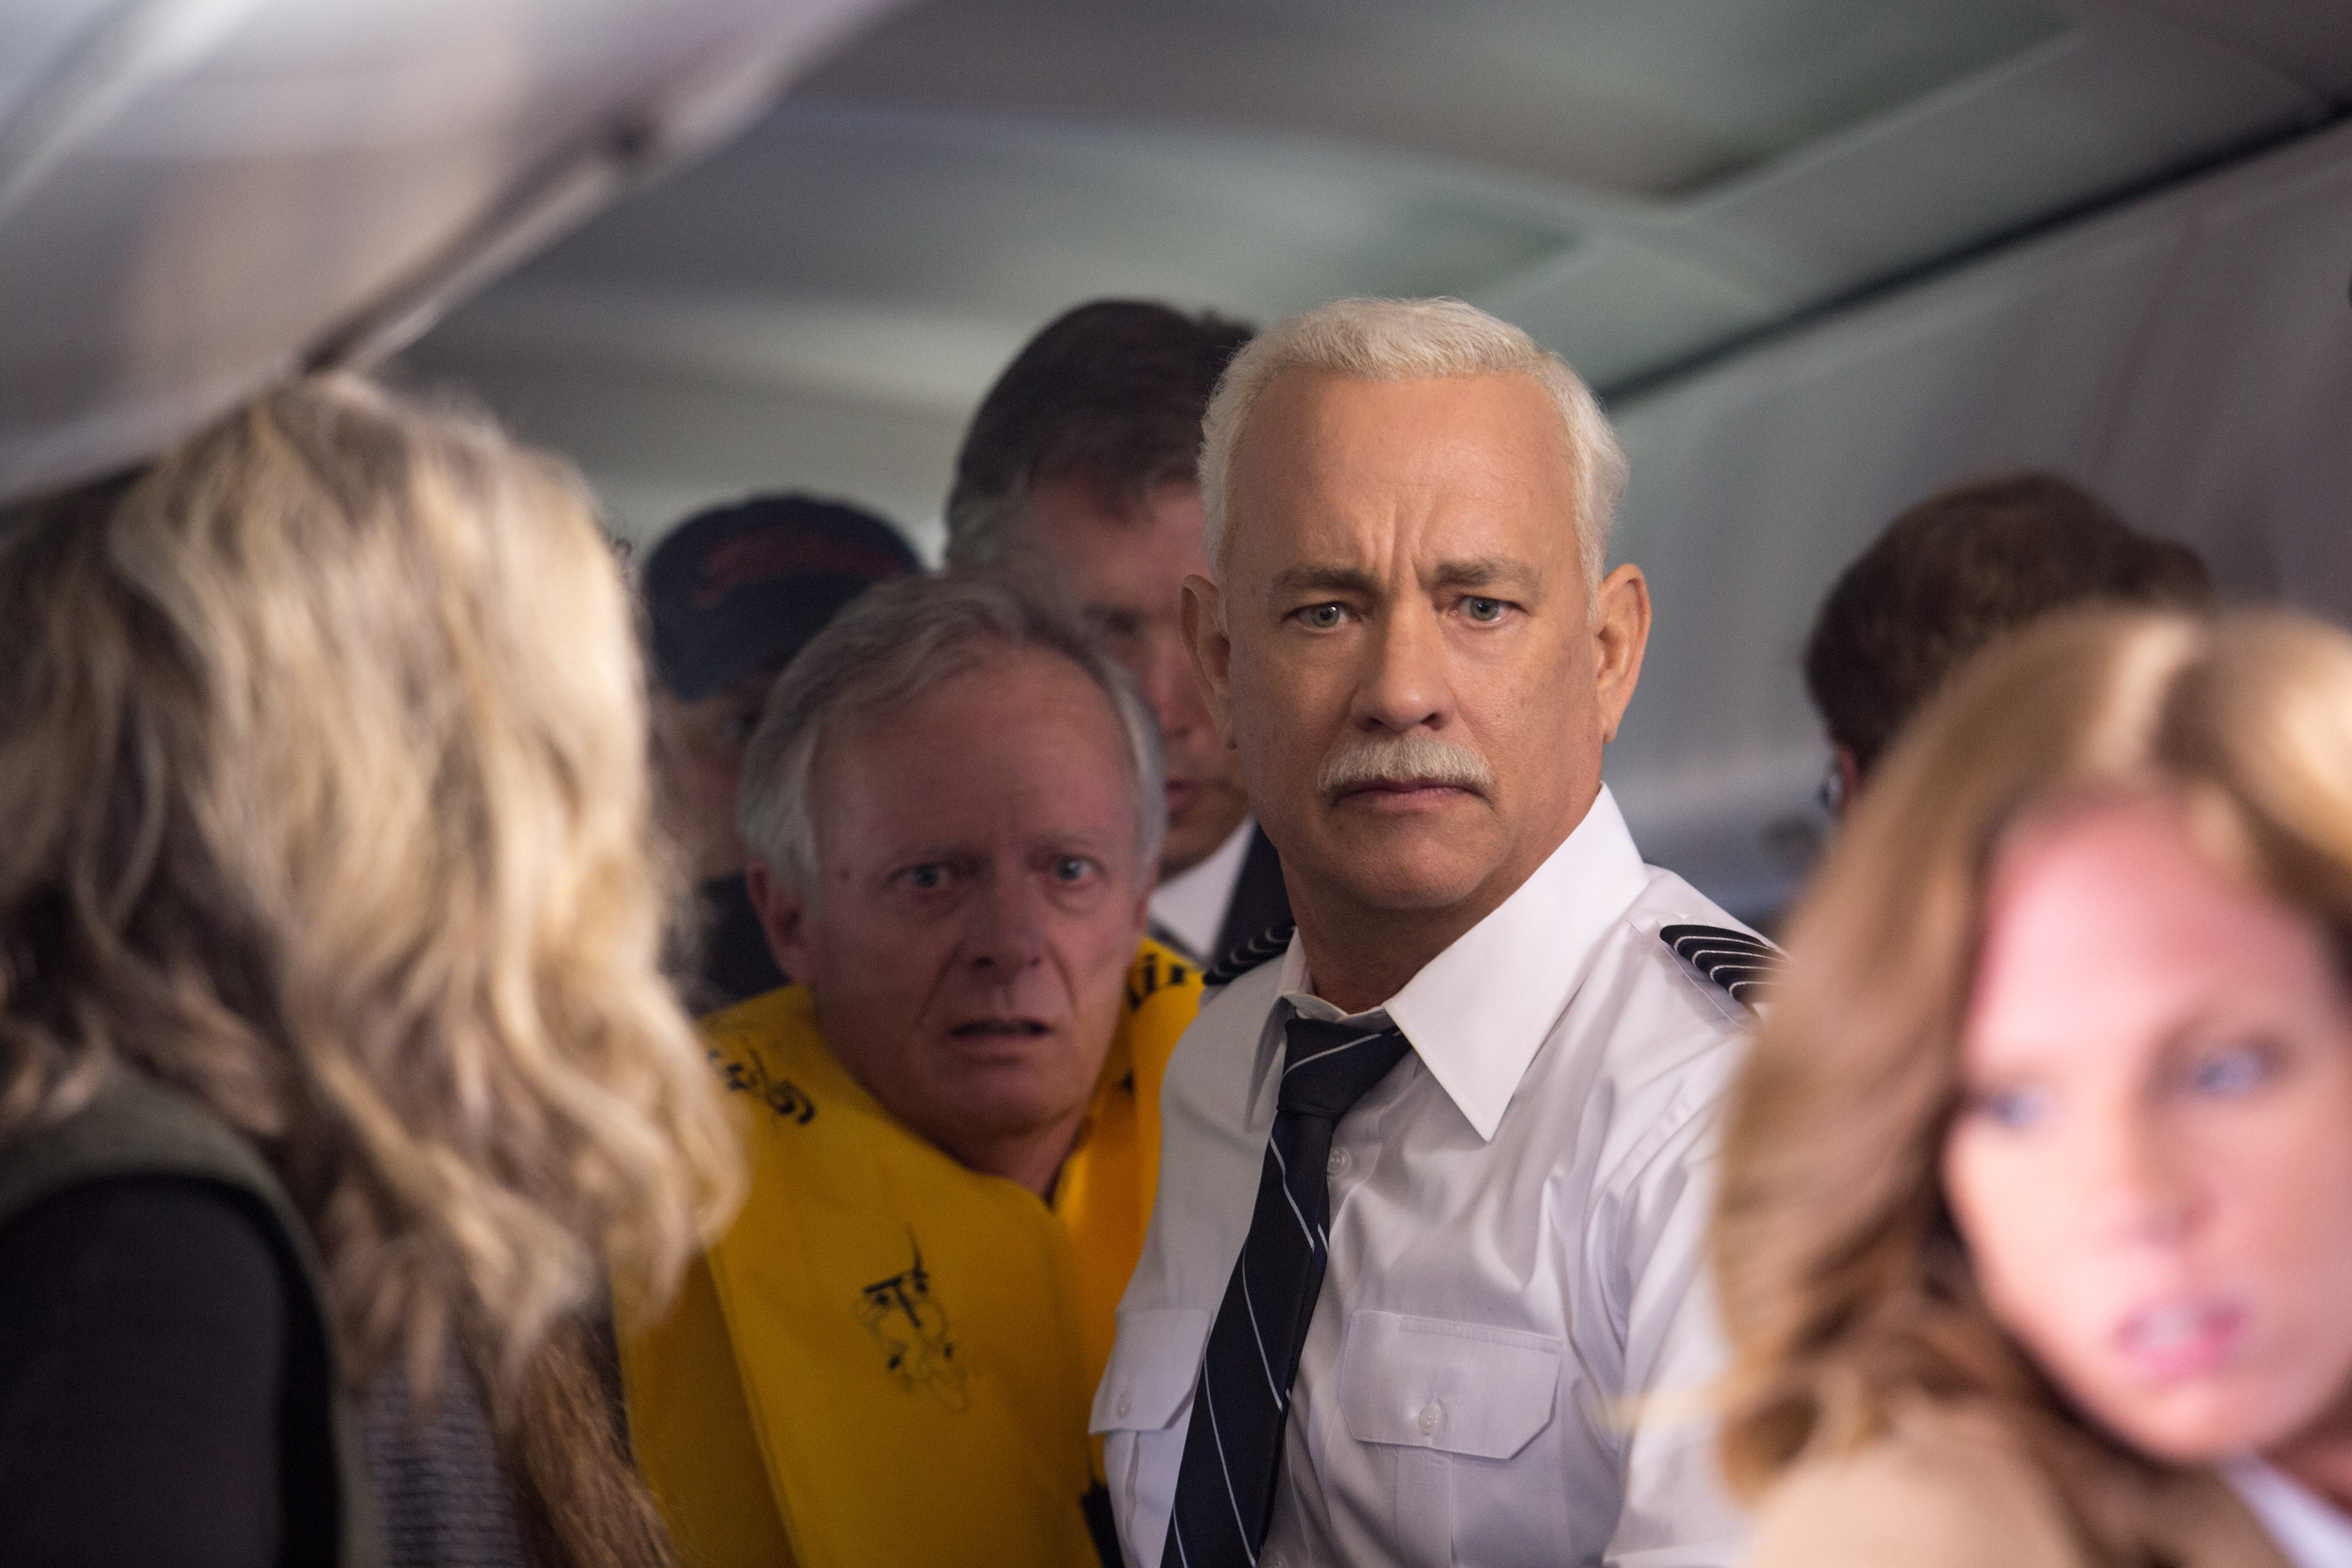 Sully makes sure everyone evacuates the plane quickly and safely. photo: Warner Bros. Entertainment.